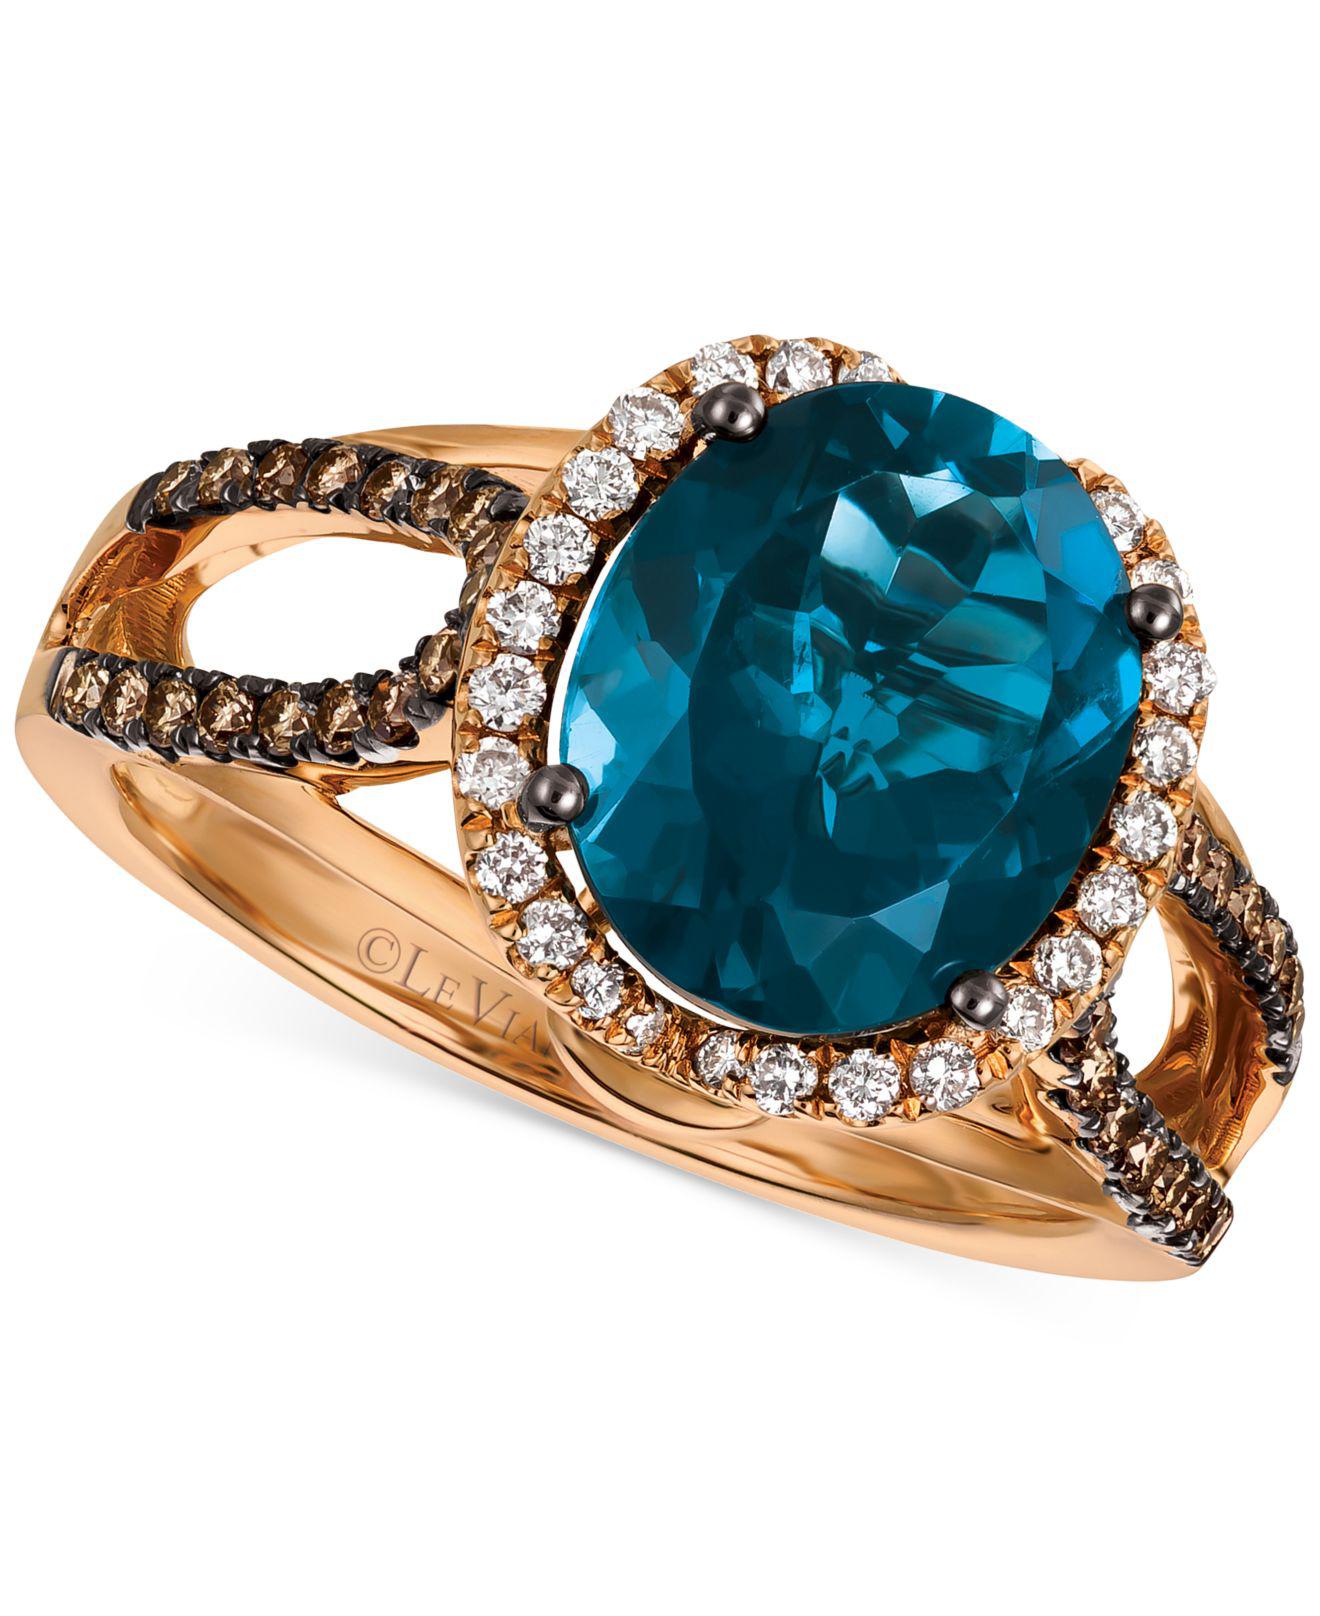 Le Vian London Blue Topaz (4 Ct. T.w.) And Diamond (3/8 Ct. T.w.) Ring